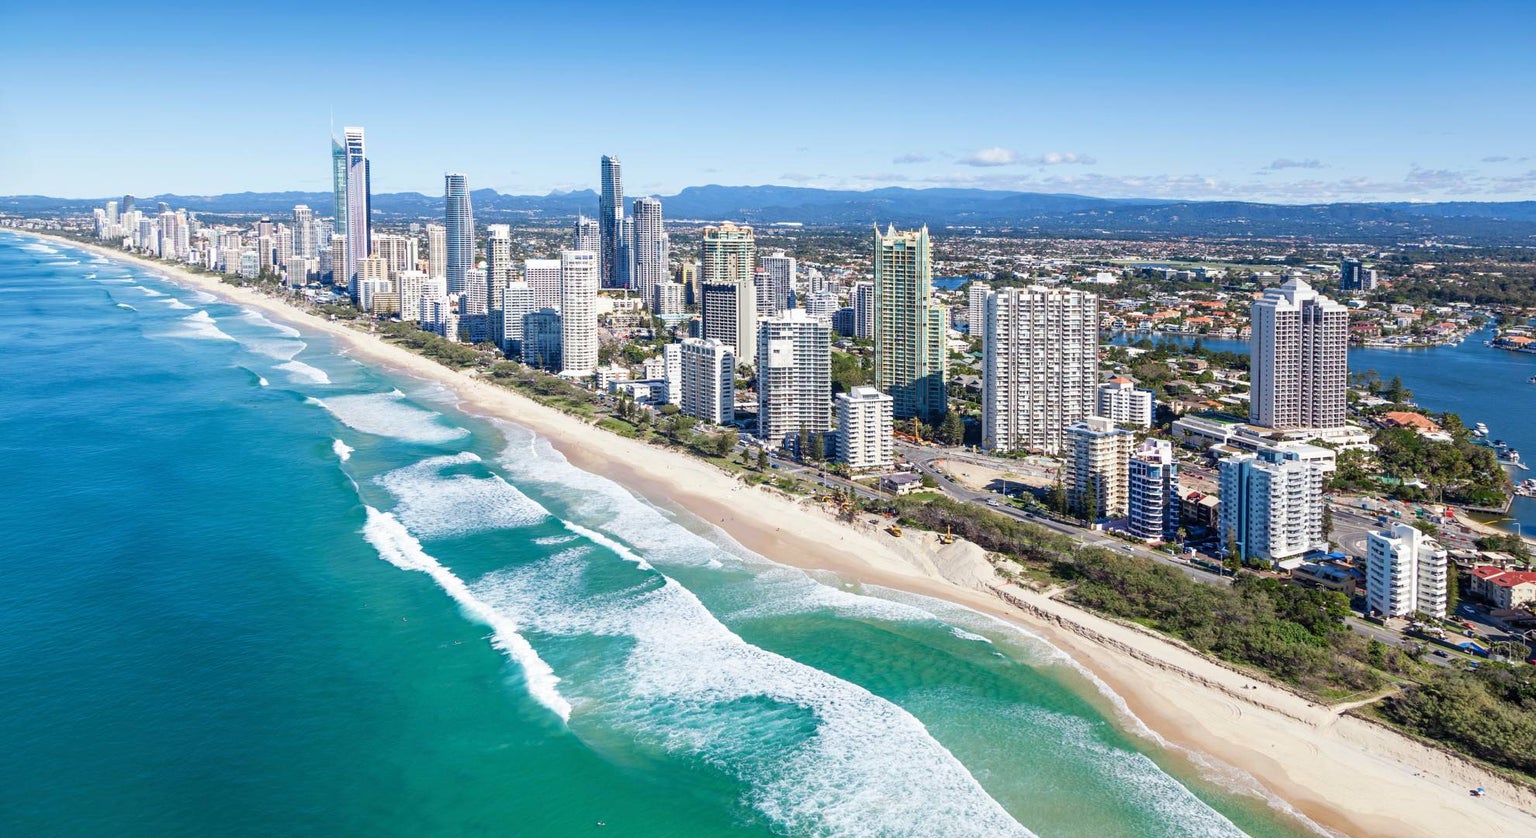 Start your therapy journey on the Gold Coast today